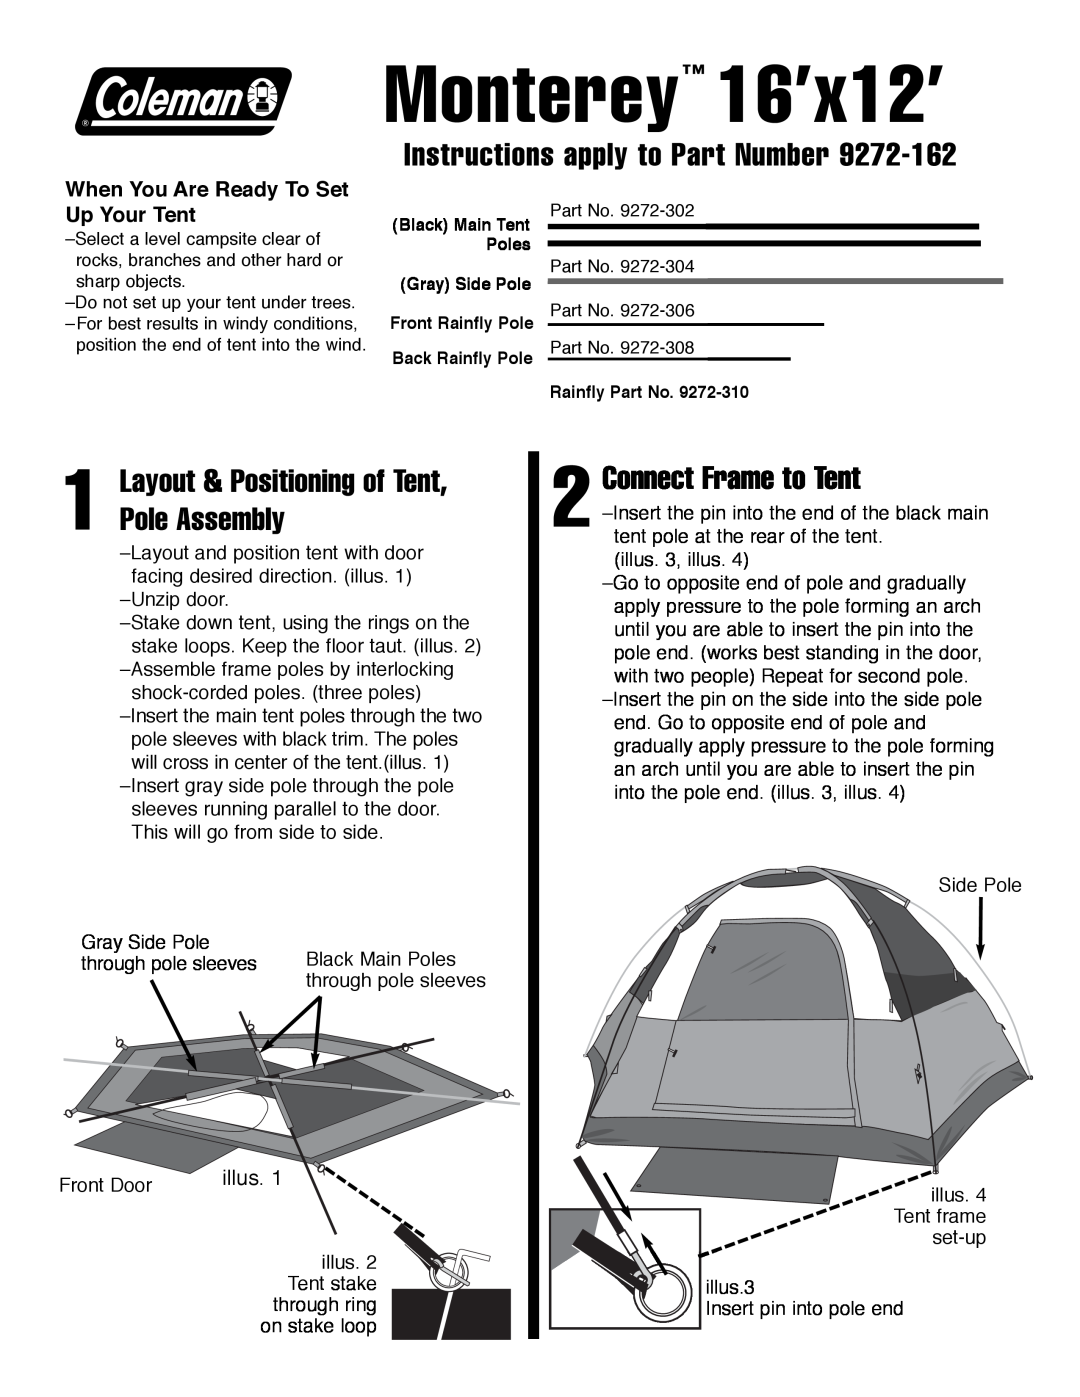 Coleman 9272-306 manual Instructions apply to Part Number, Layout & Positioning of Tent, Pole Assembly, Monterey 16’x12’ 